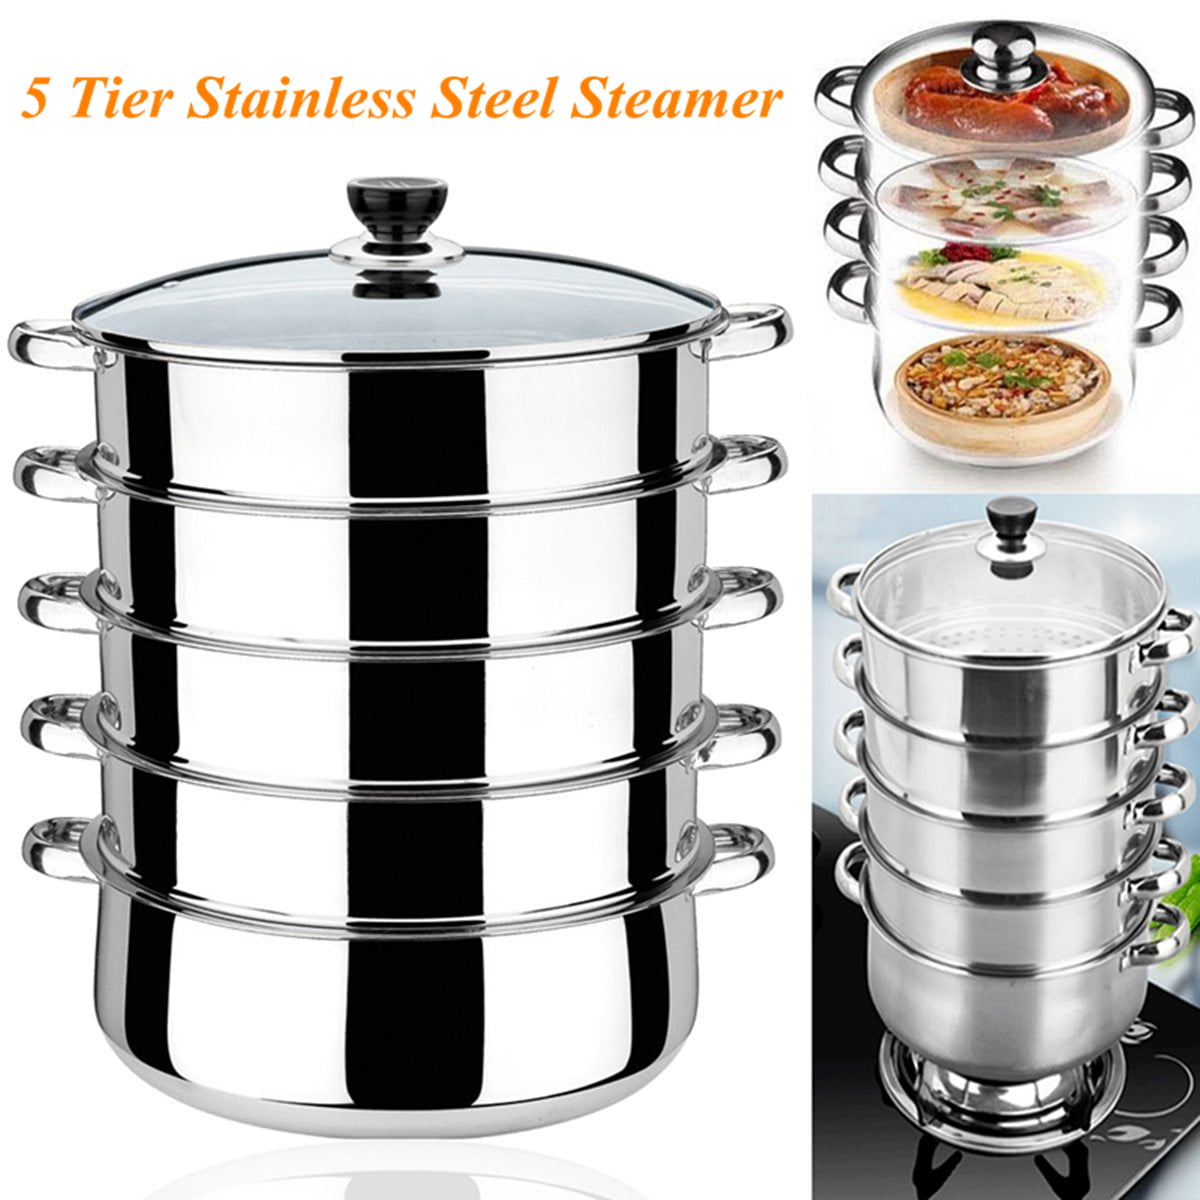 Details about   Large Stainless Steel Steamer 30cm Steam Pot Glass Lid Cooker Saucepan Silver 